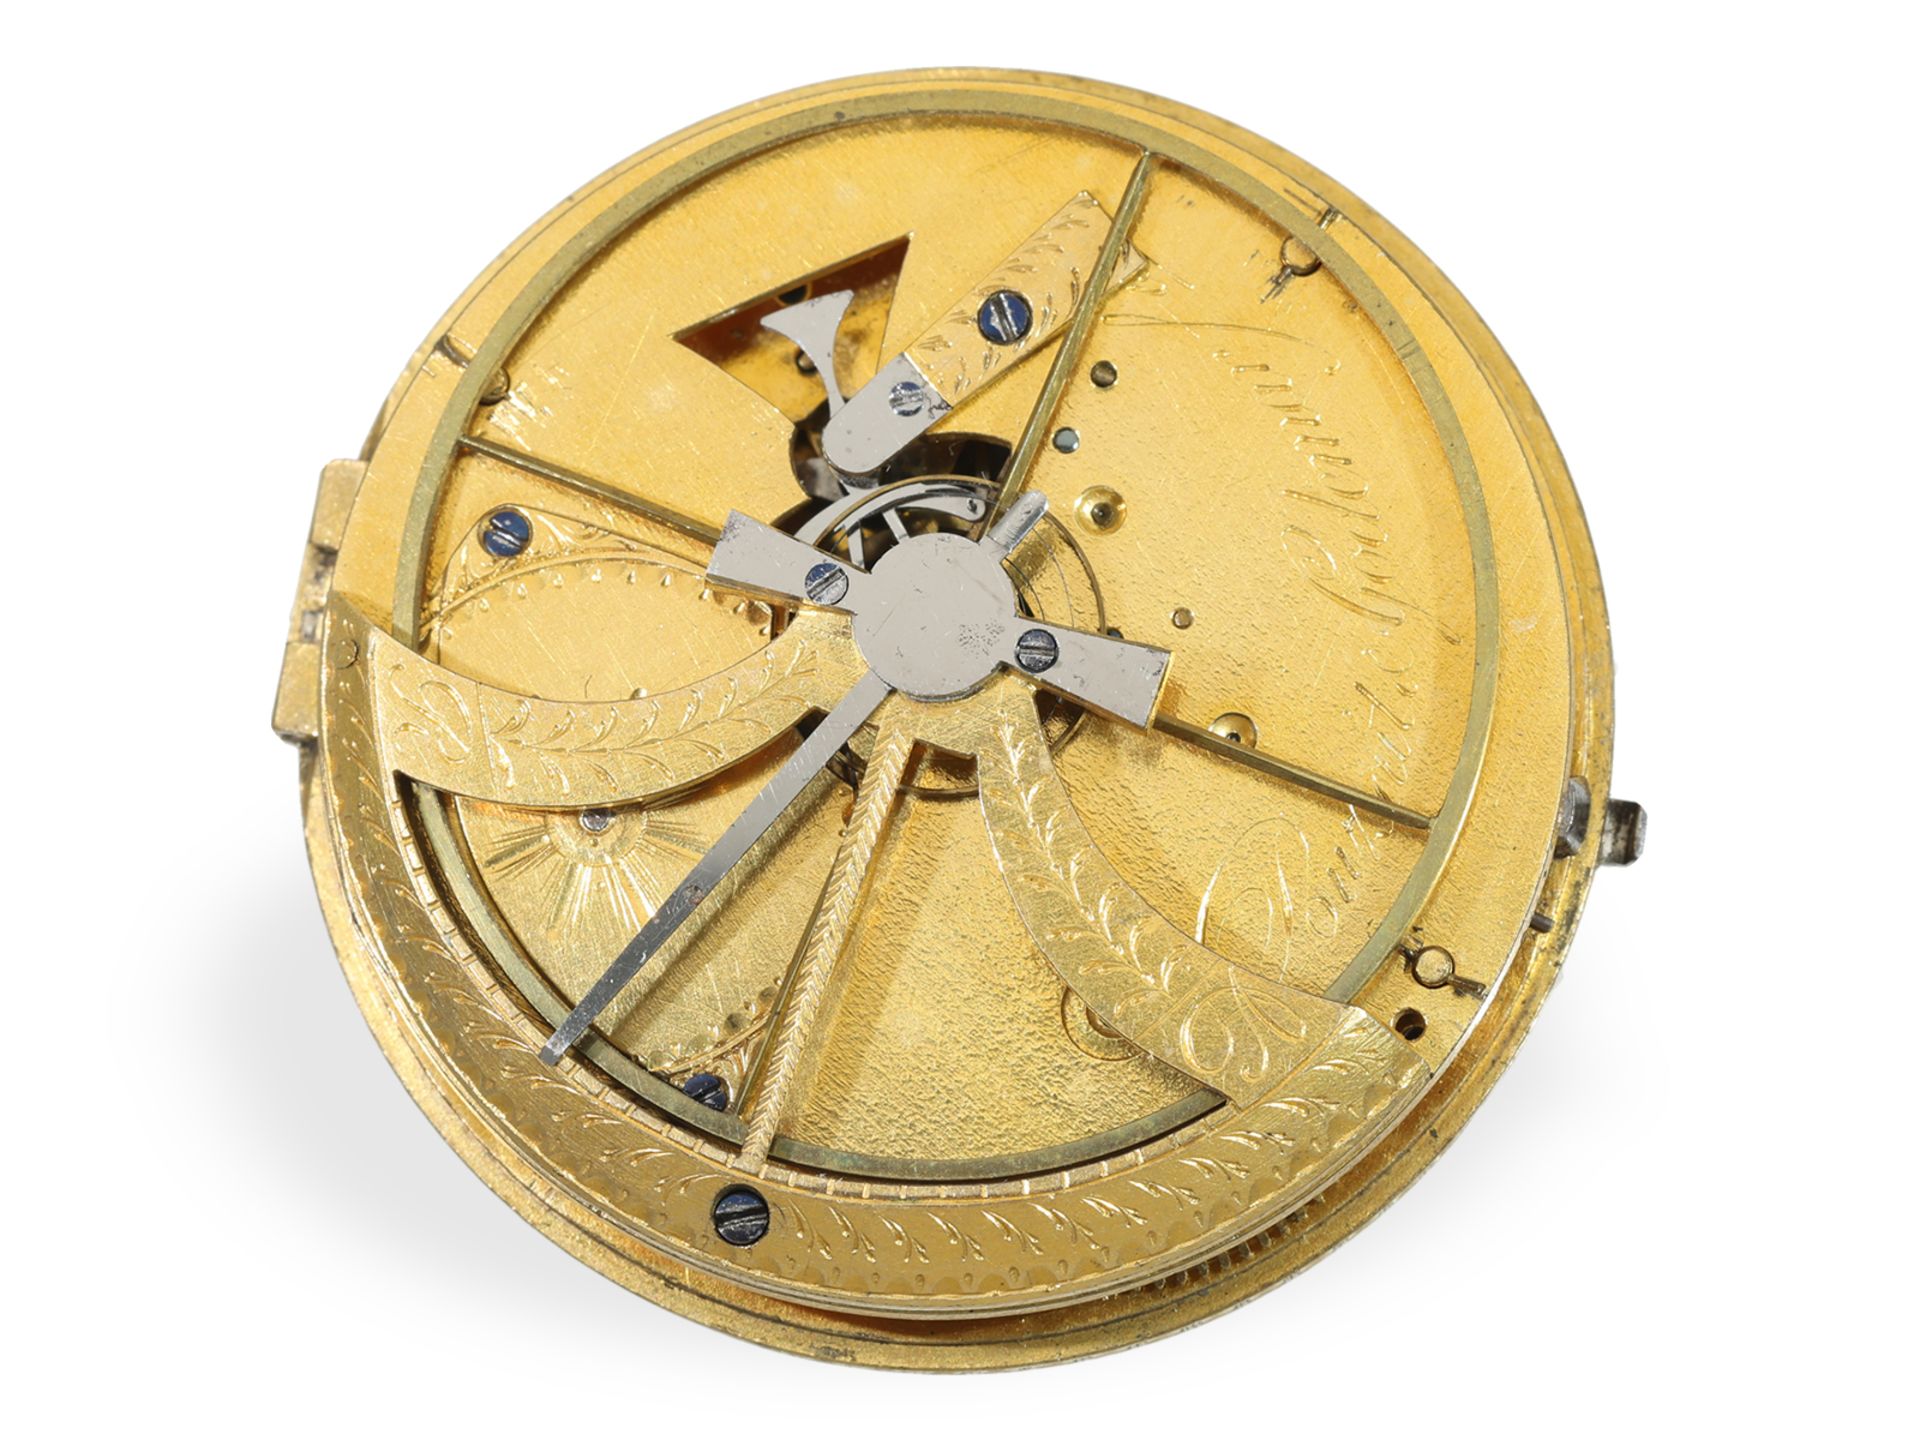 Pocket watch: absolute rarity, Pouzait with jumping seconds and calendar, signed Pouzait, ca. 1790 - Image 3 of 4